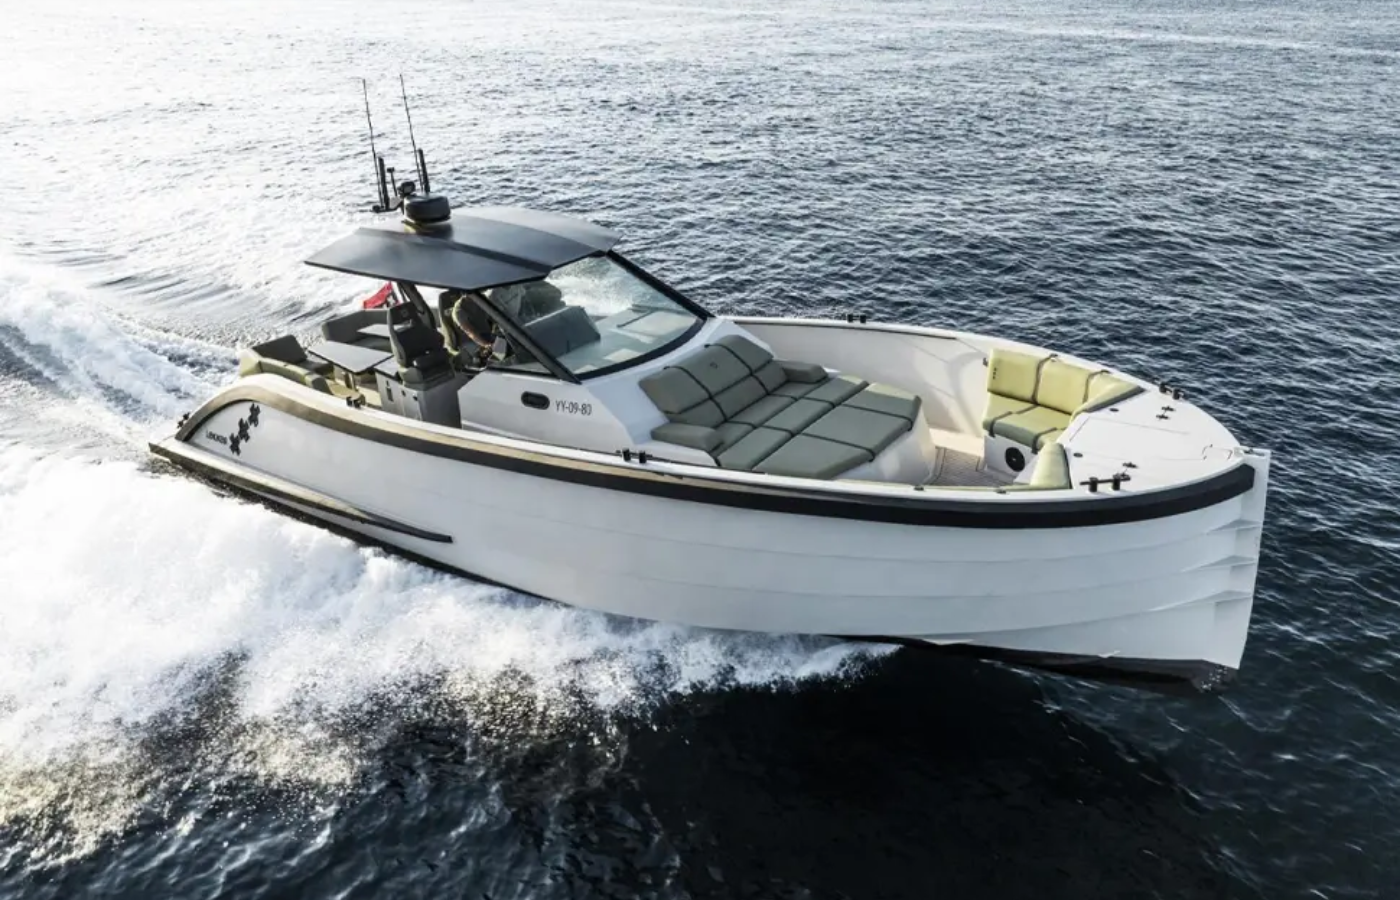 The Lekker 44 Is The Perfect Luxury Boat For Entertaining [In the News]